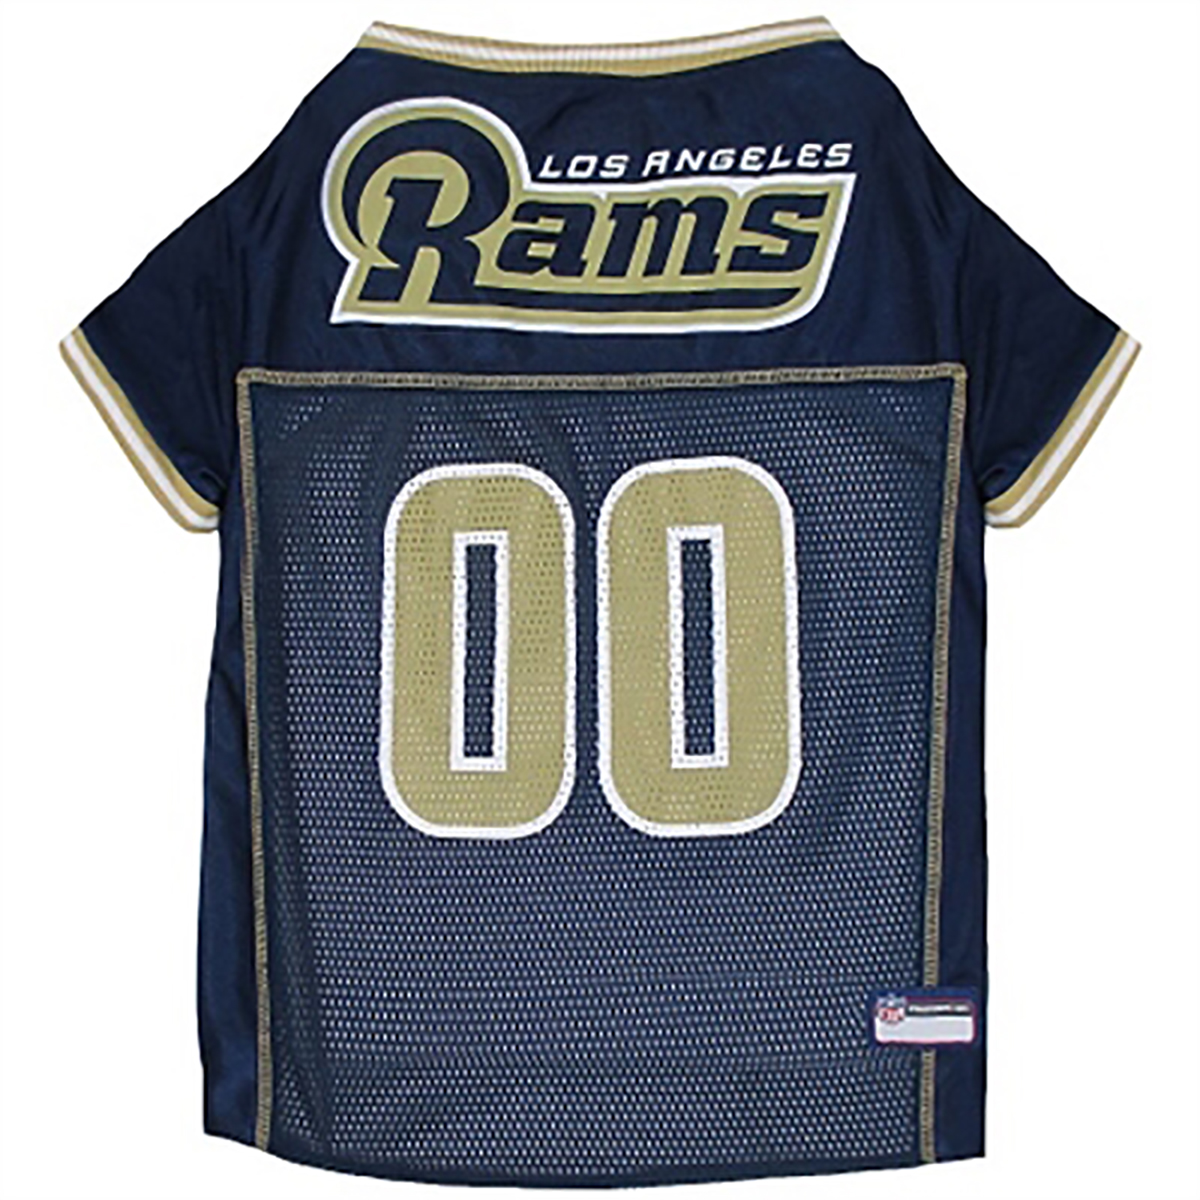 Los Angeles Rams Officially Licensed Dog Jersey - Gold Trim